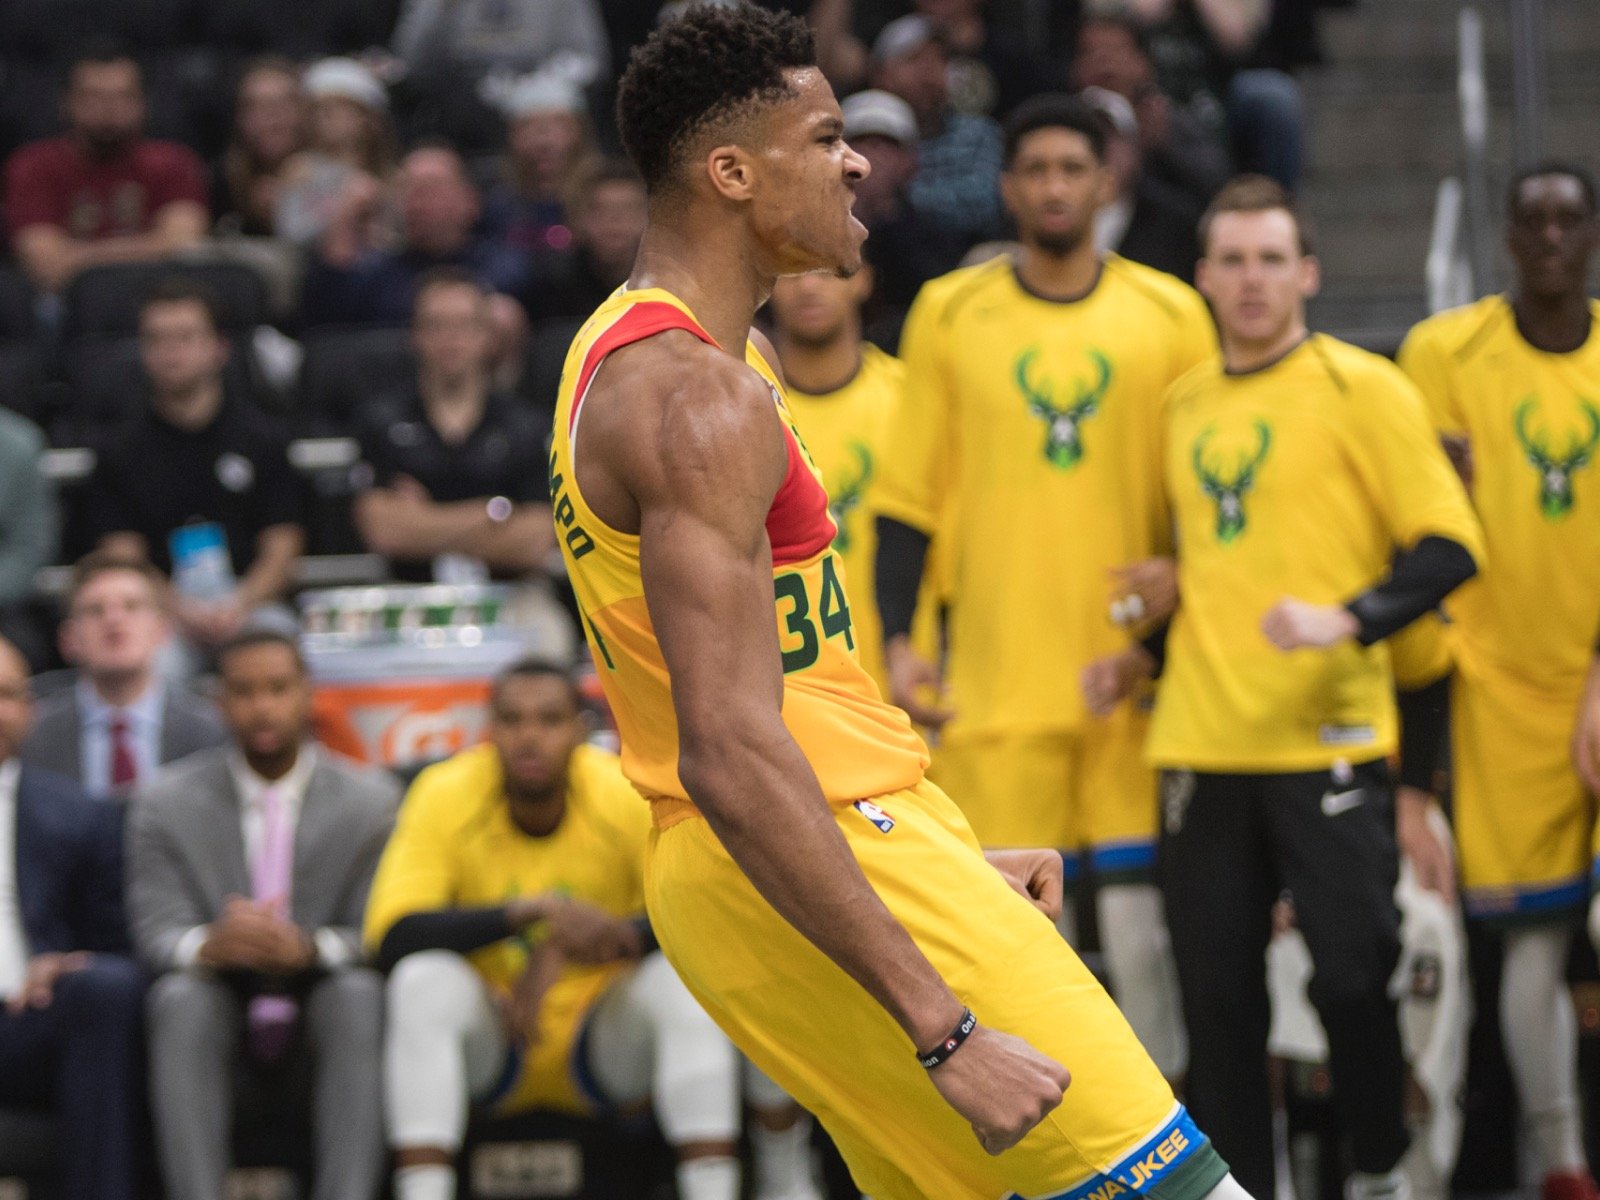 giannis jersey yellow